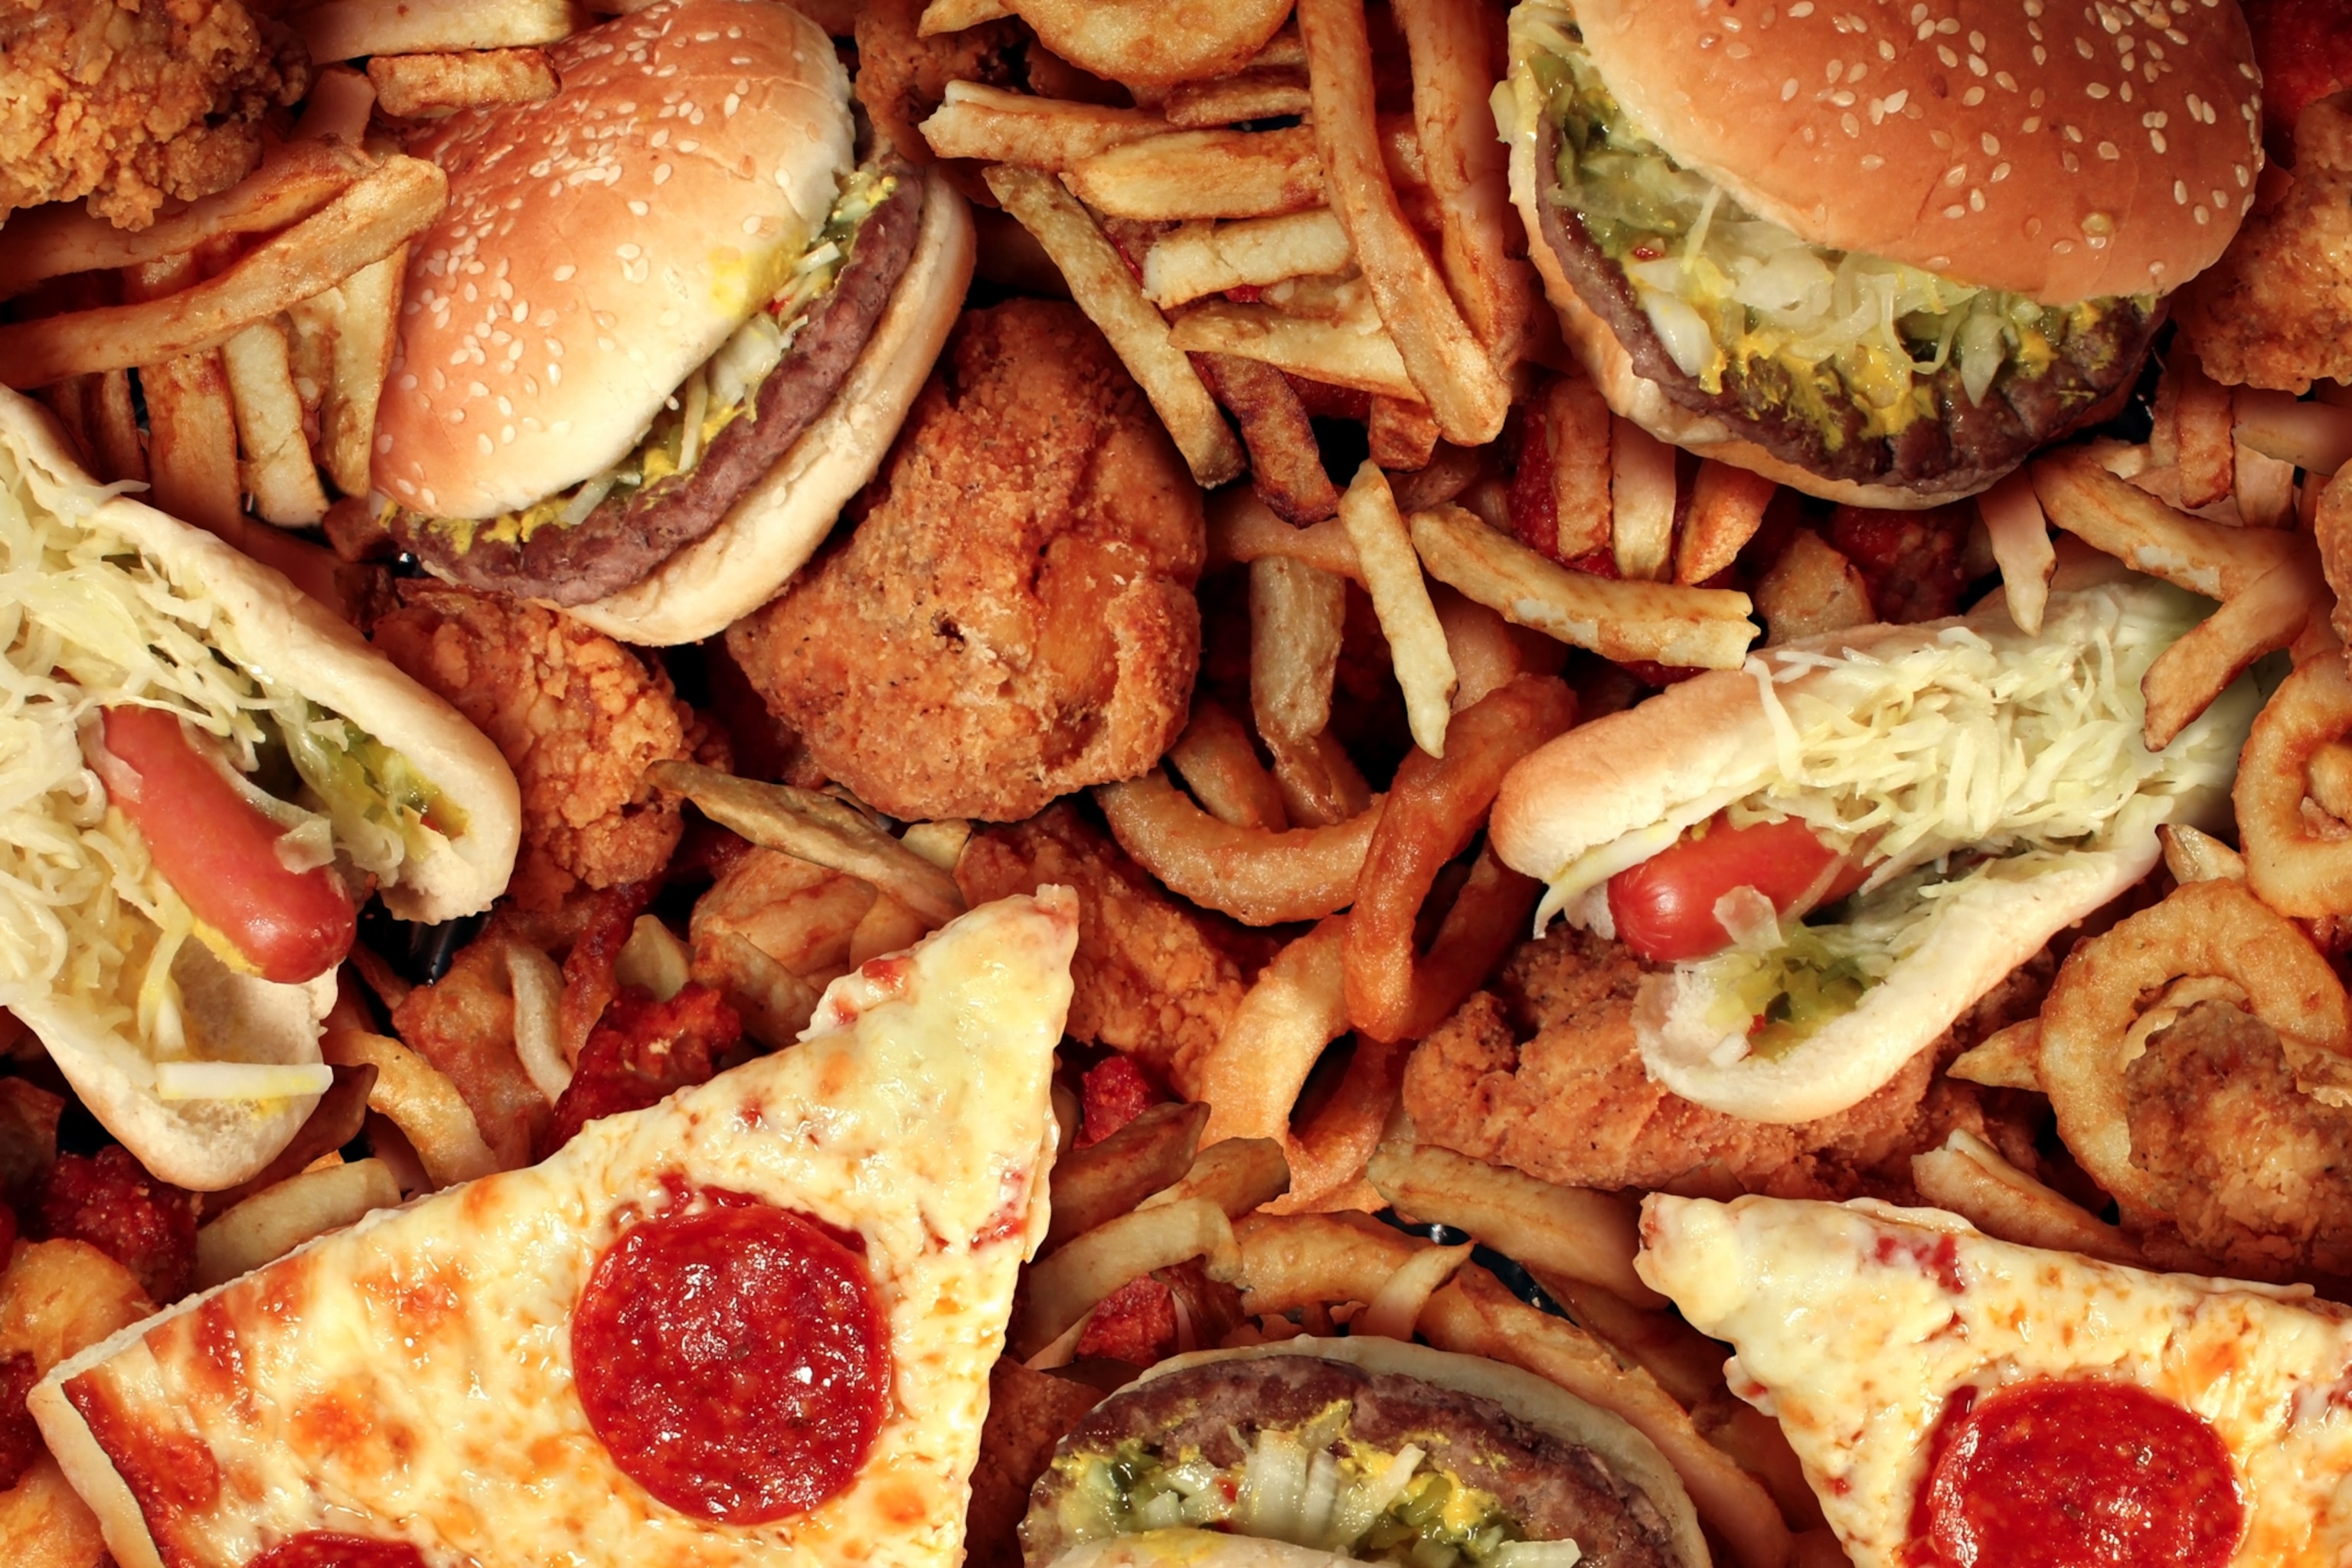 How ultra-processed food harms the body and brain